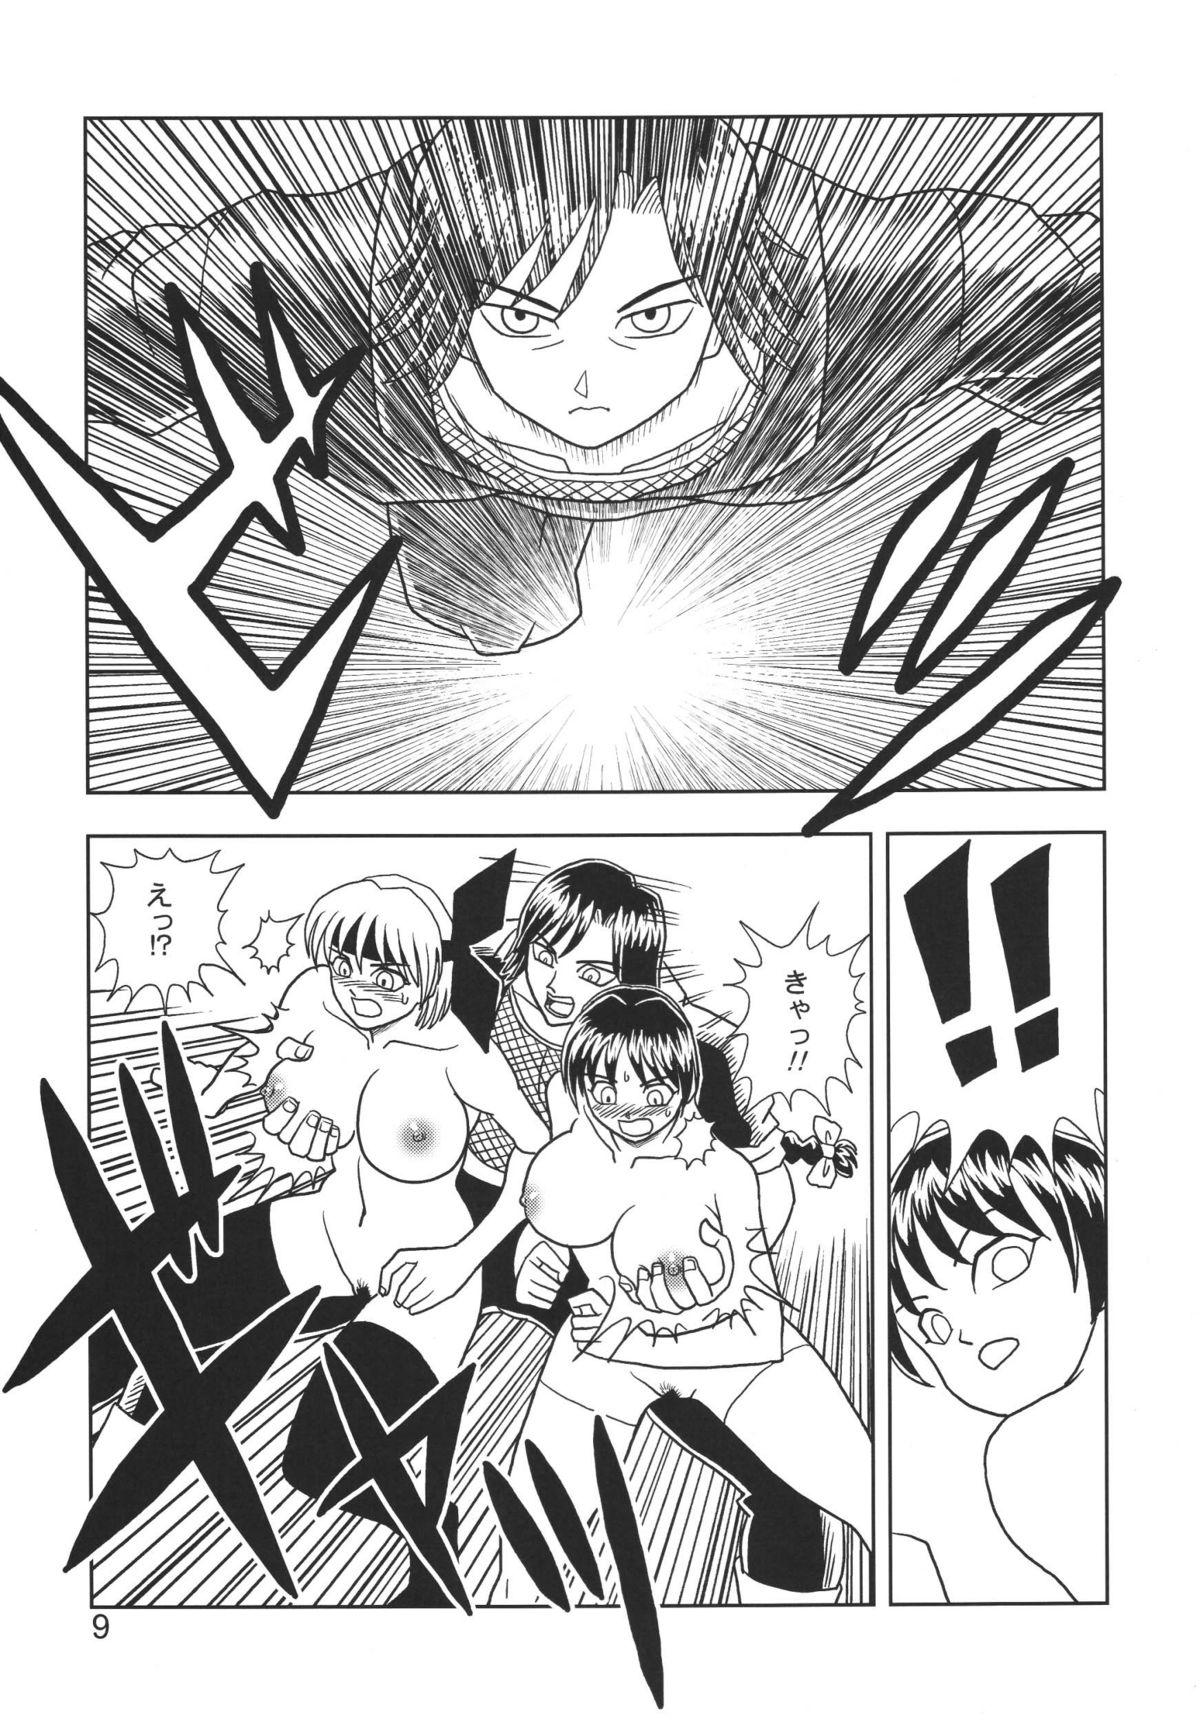 Ejaculation Kasumi or Ayane - Dead or alive Analplay - Page 9